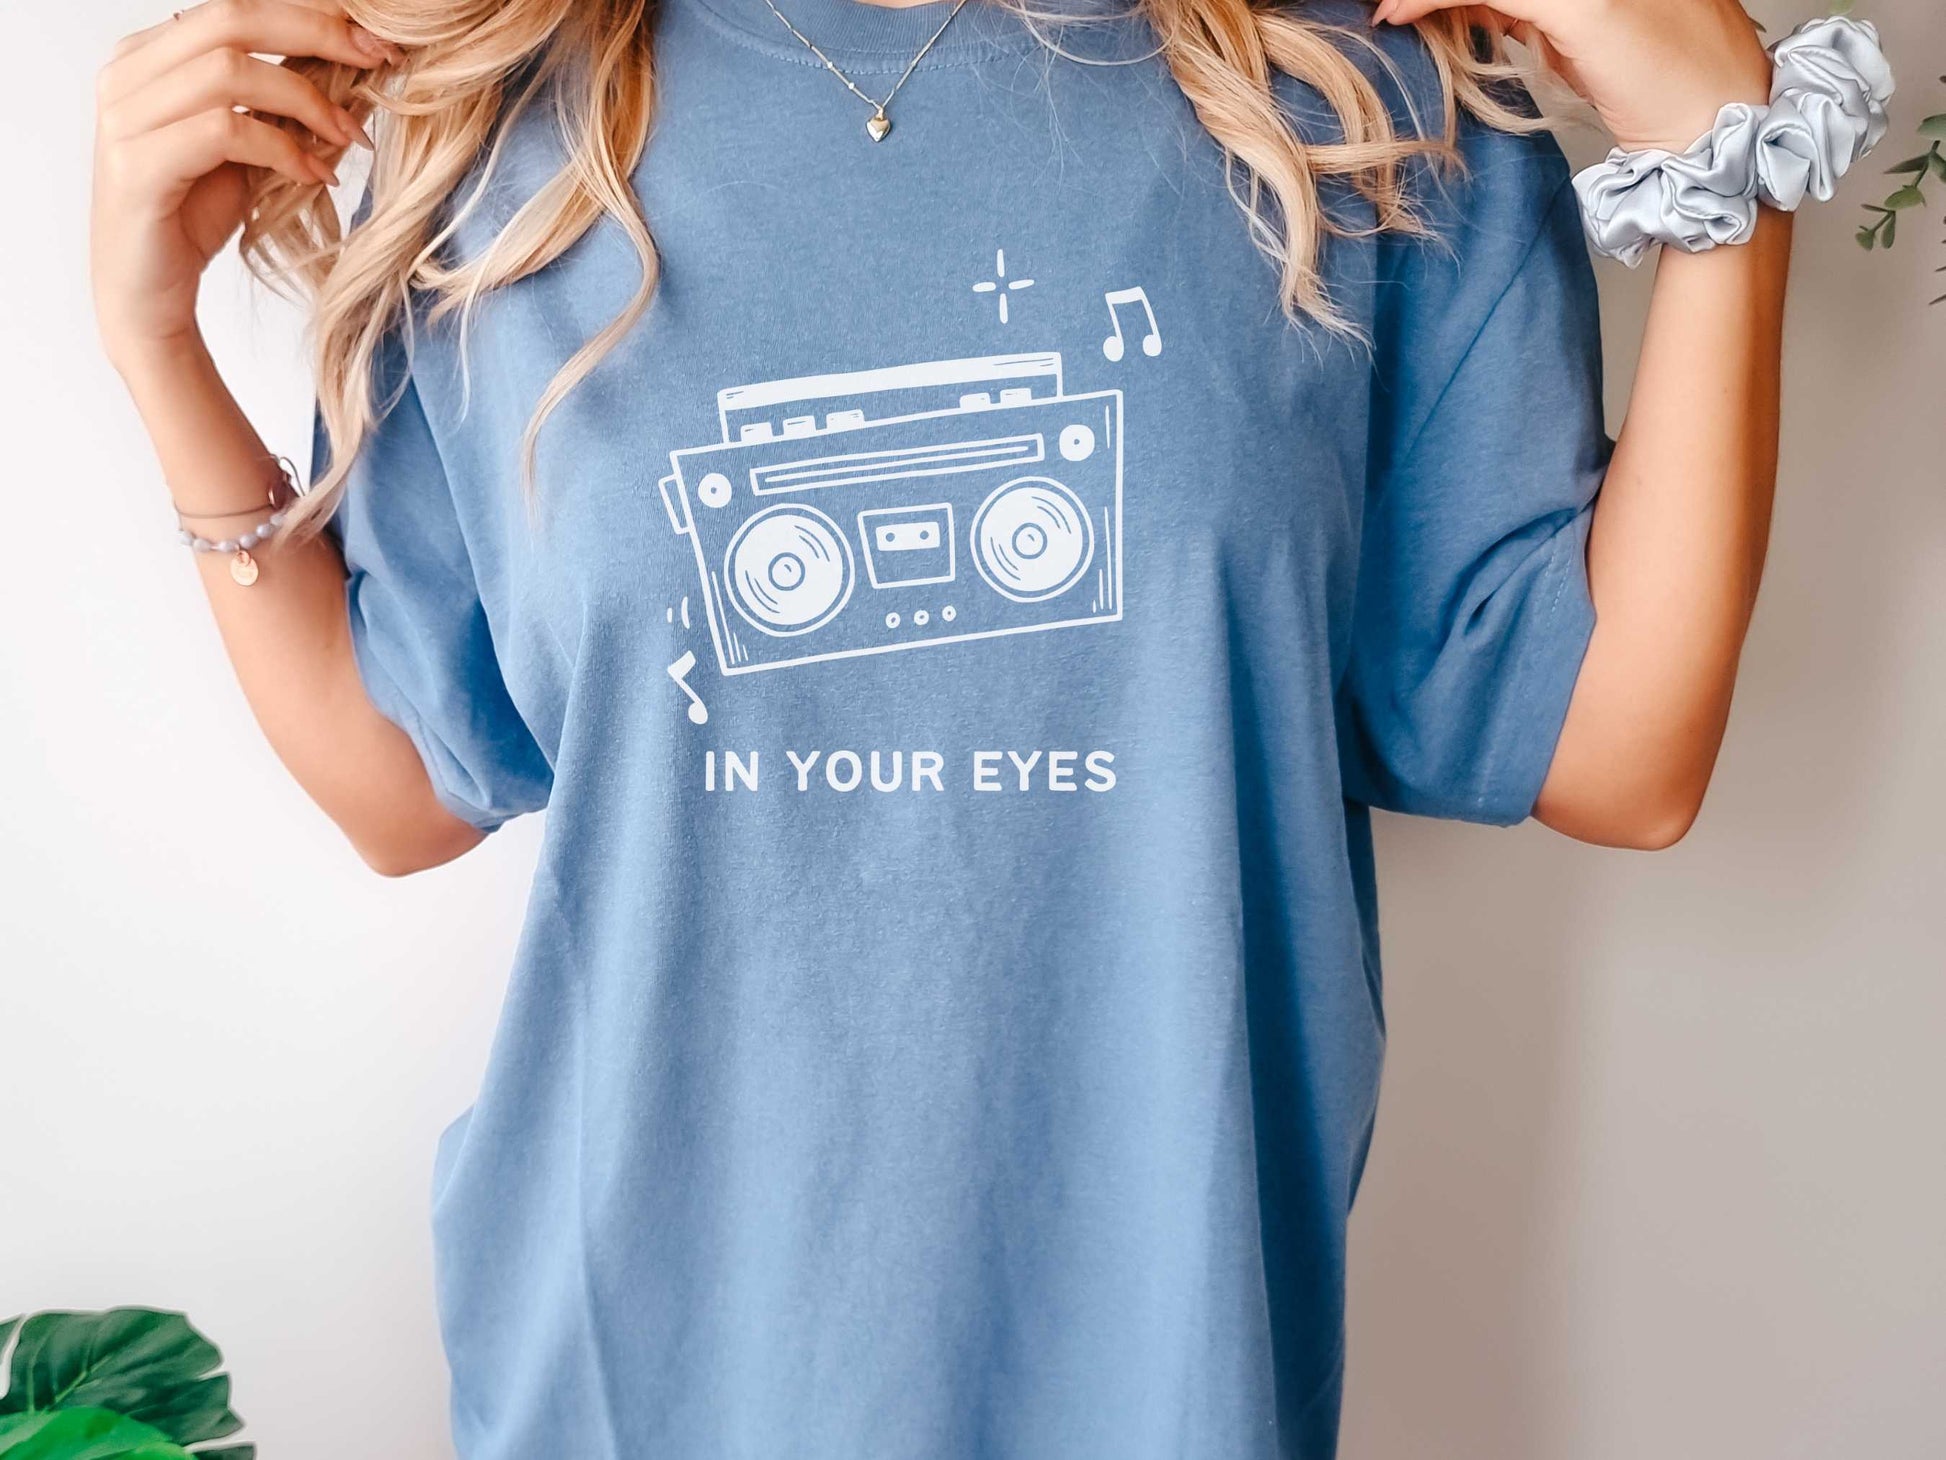 Say Anything T-Shirt in Blue Jean